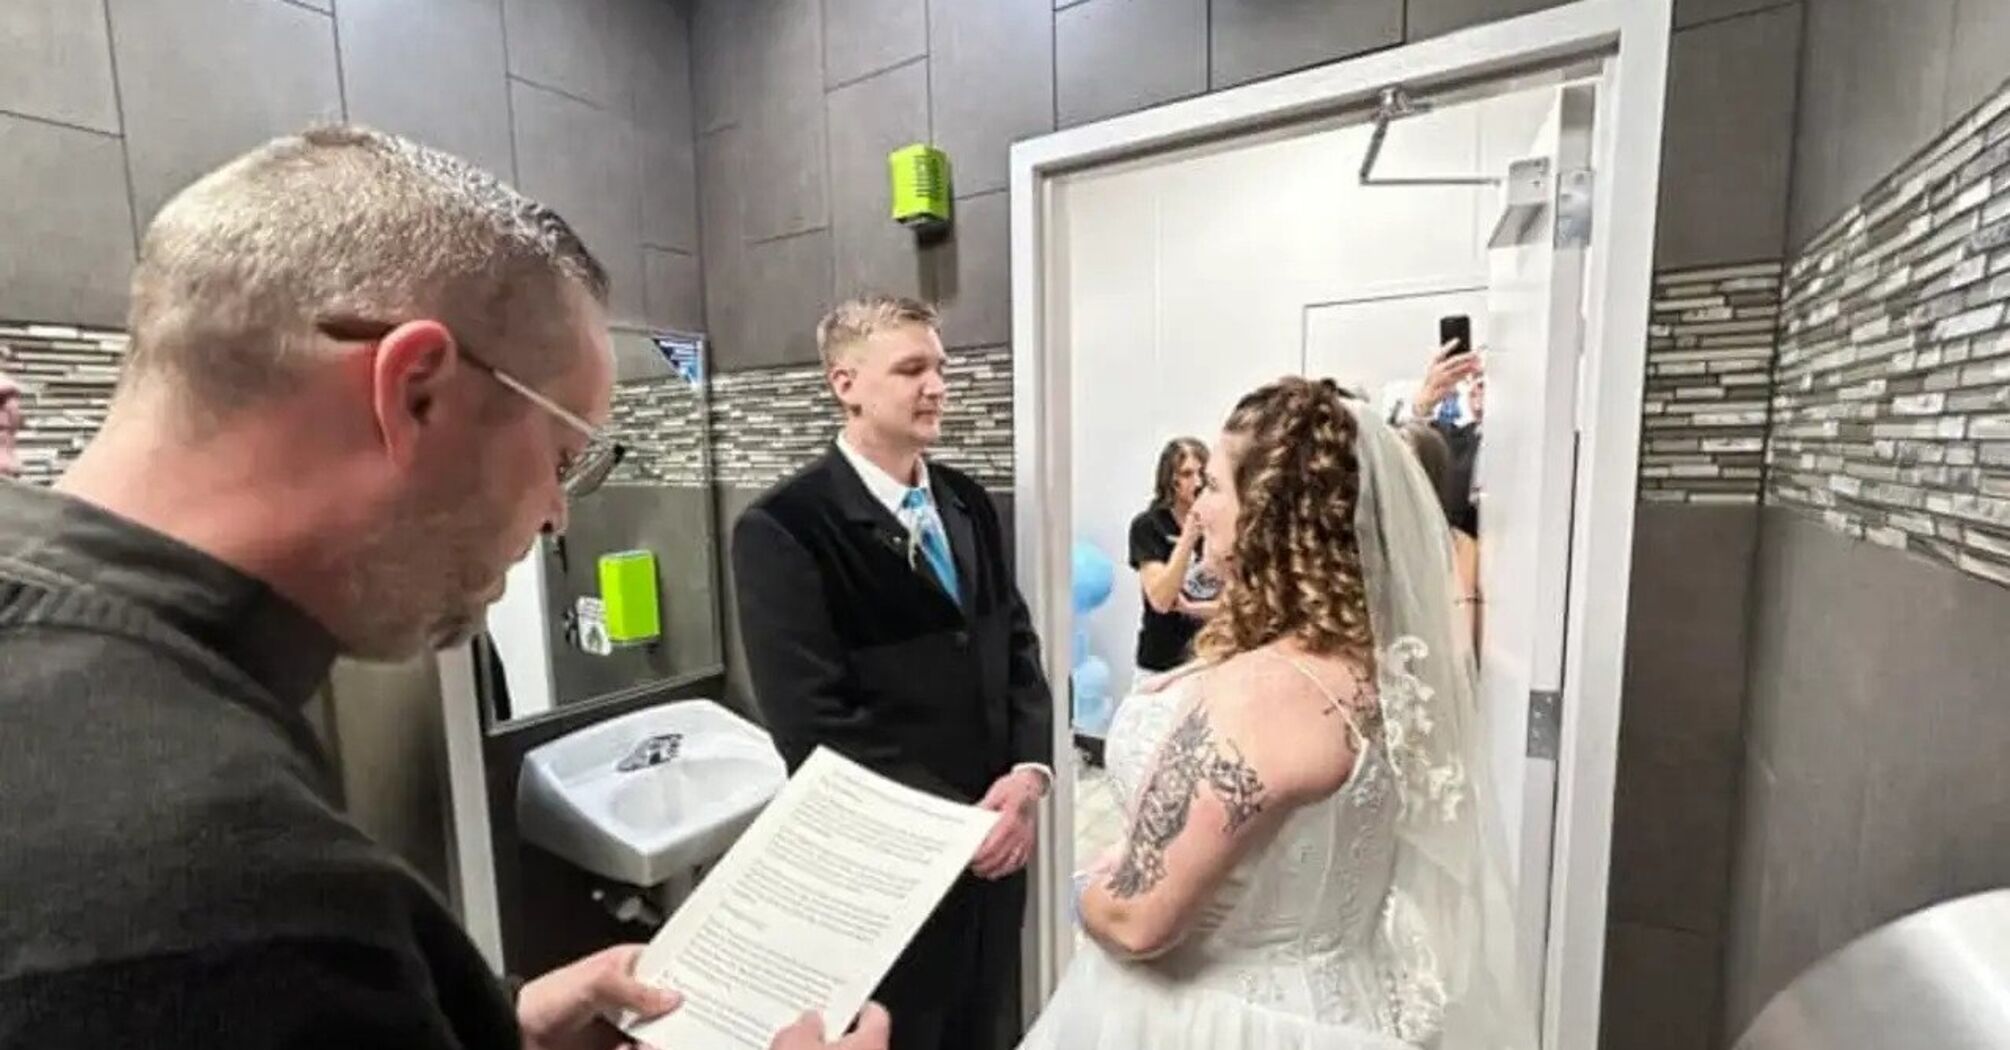 The couple held their wedding in a gas station restroom